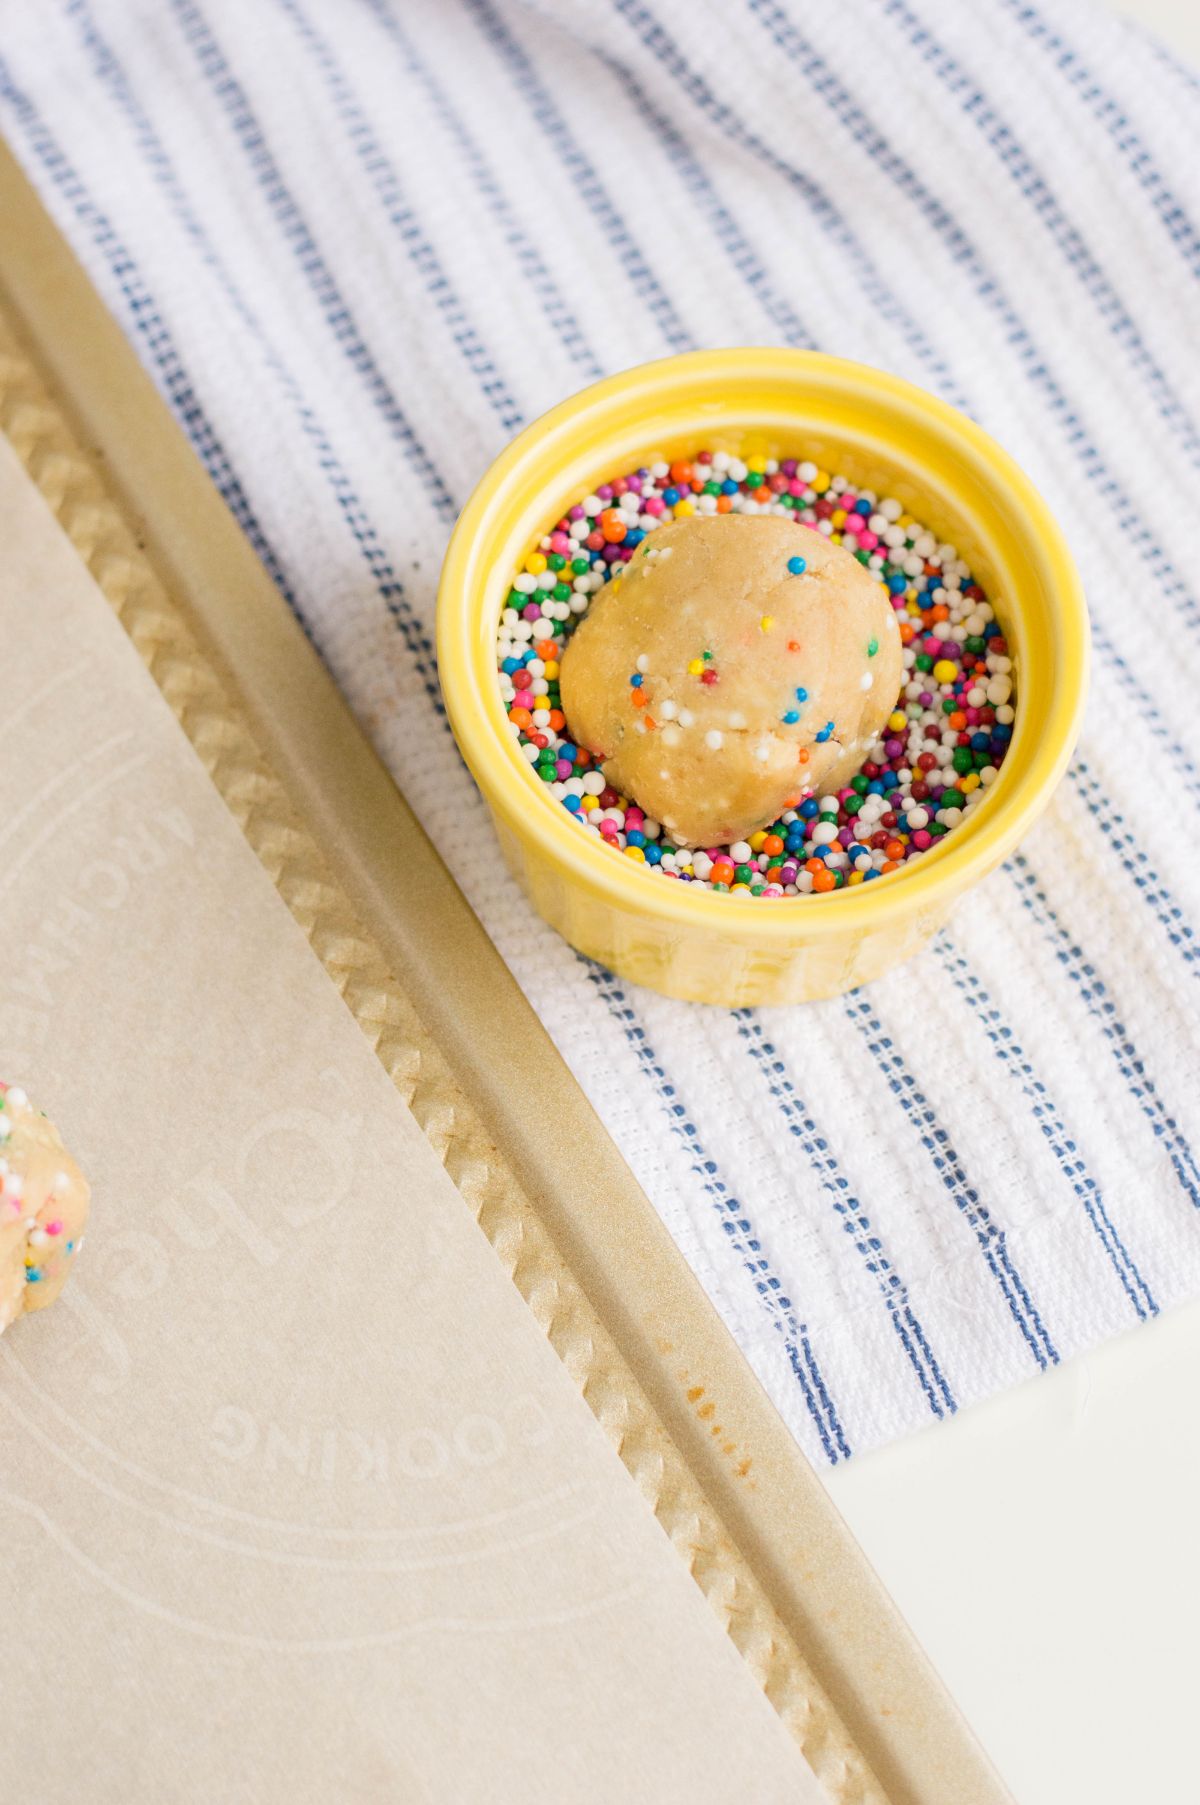 A shaped cookie dough being rolled in a bowl of sprinkles.